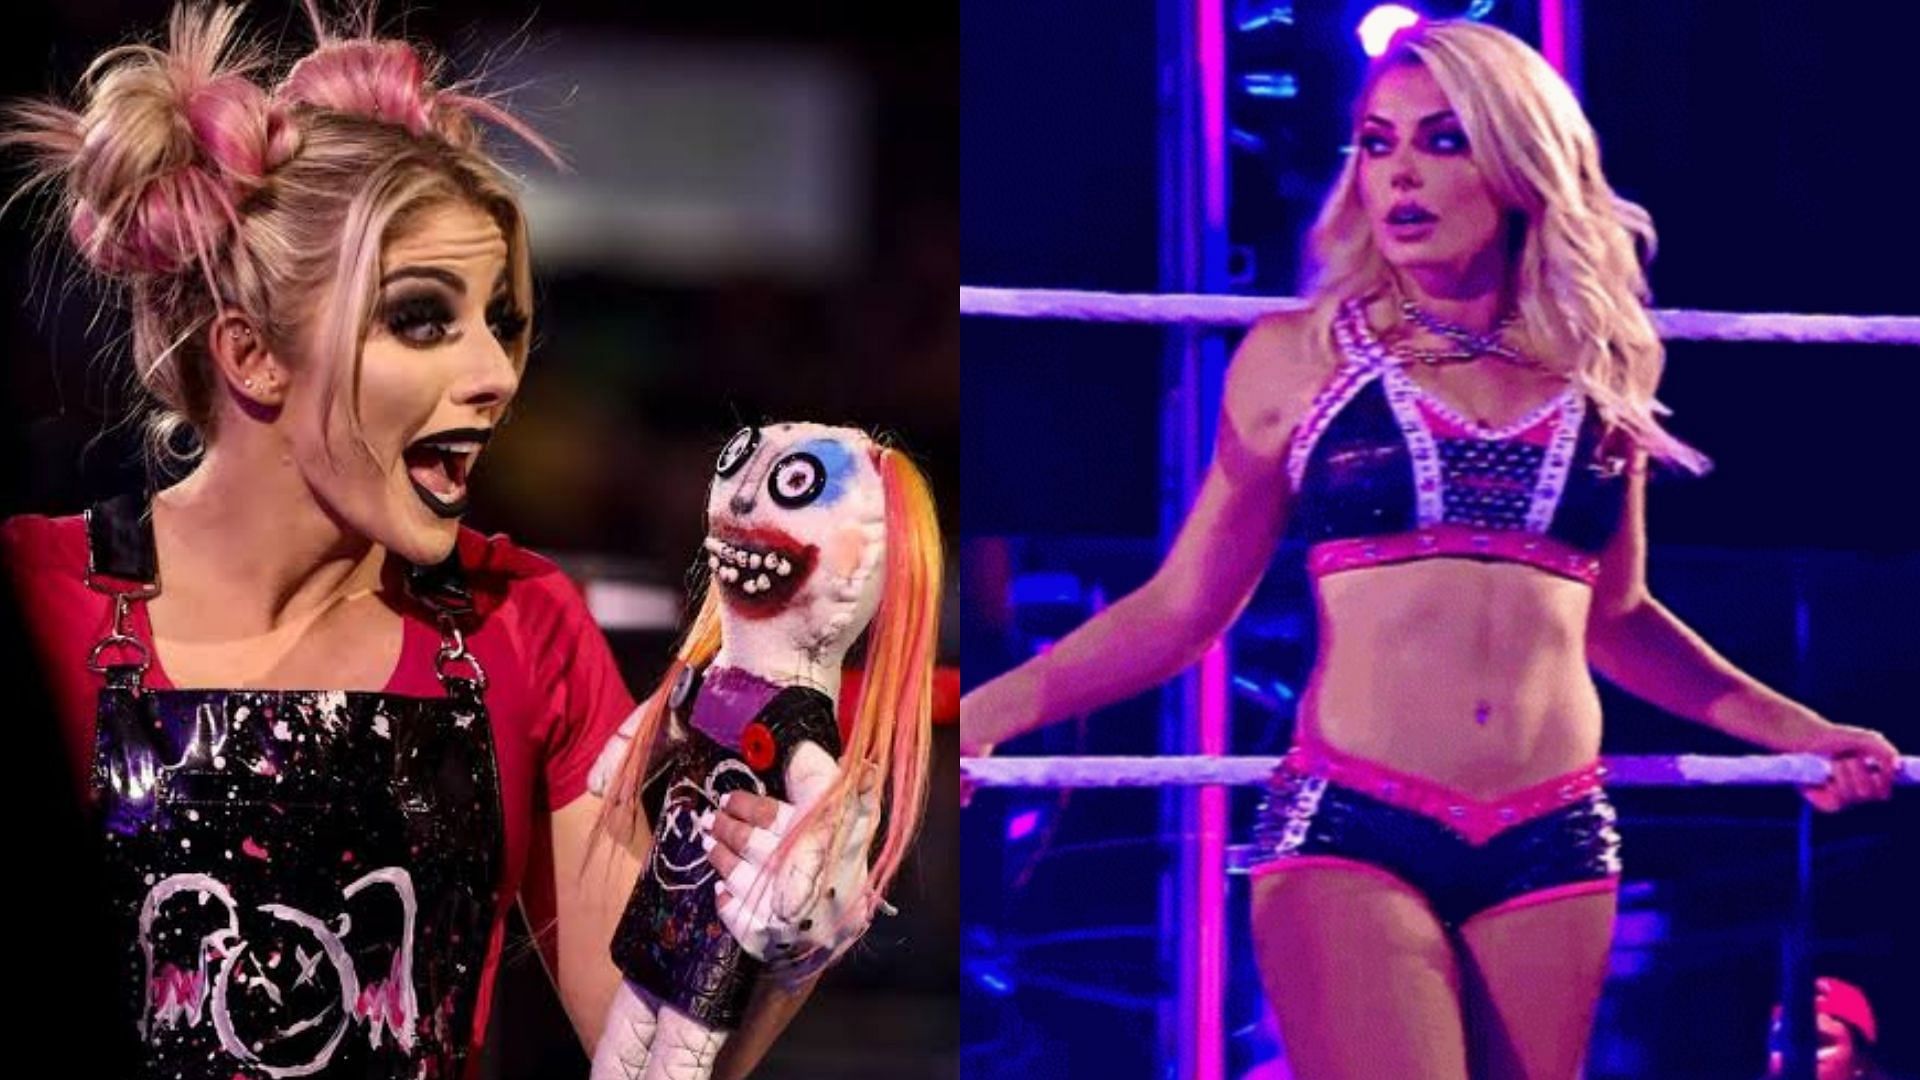 Alexa Bliss is yet to make her return to in-ring action